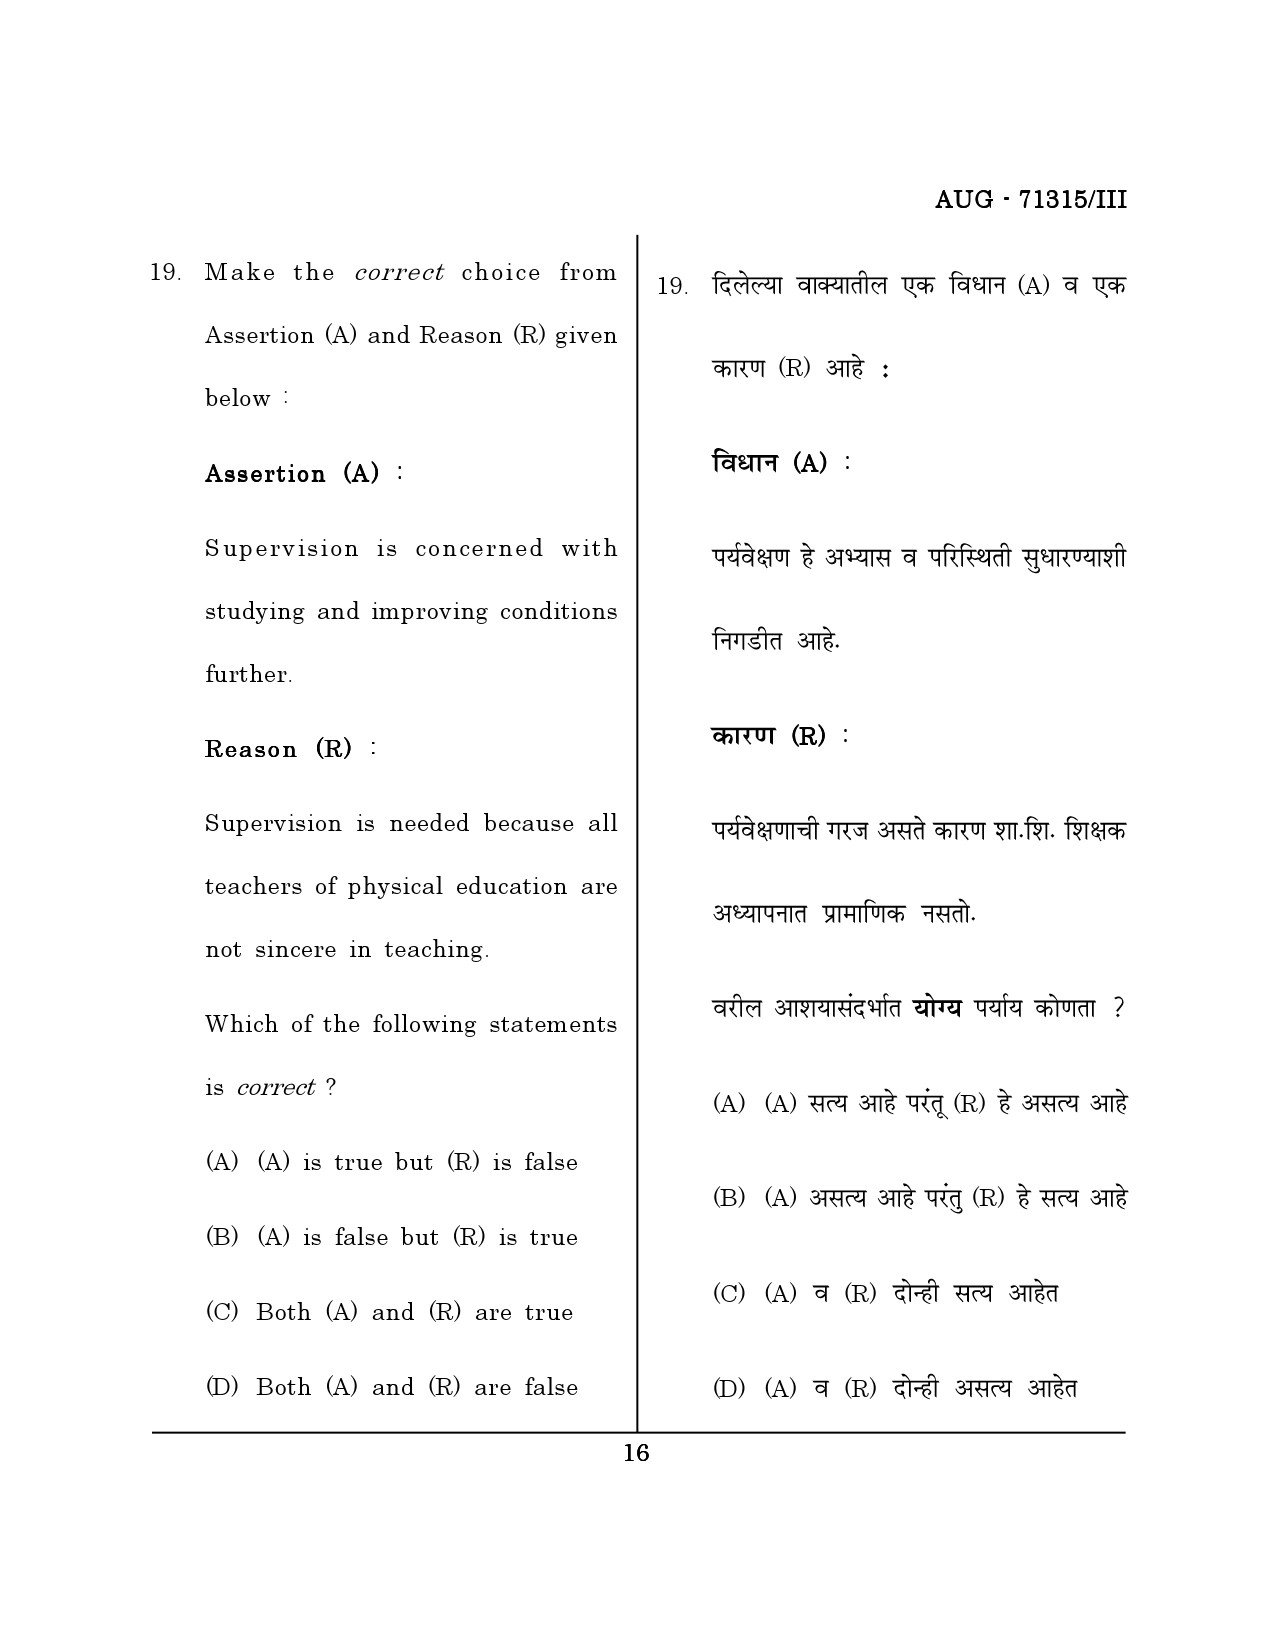 Maharashtra SET Physical Education Question Paper III August 2015 15